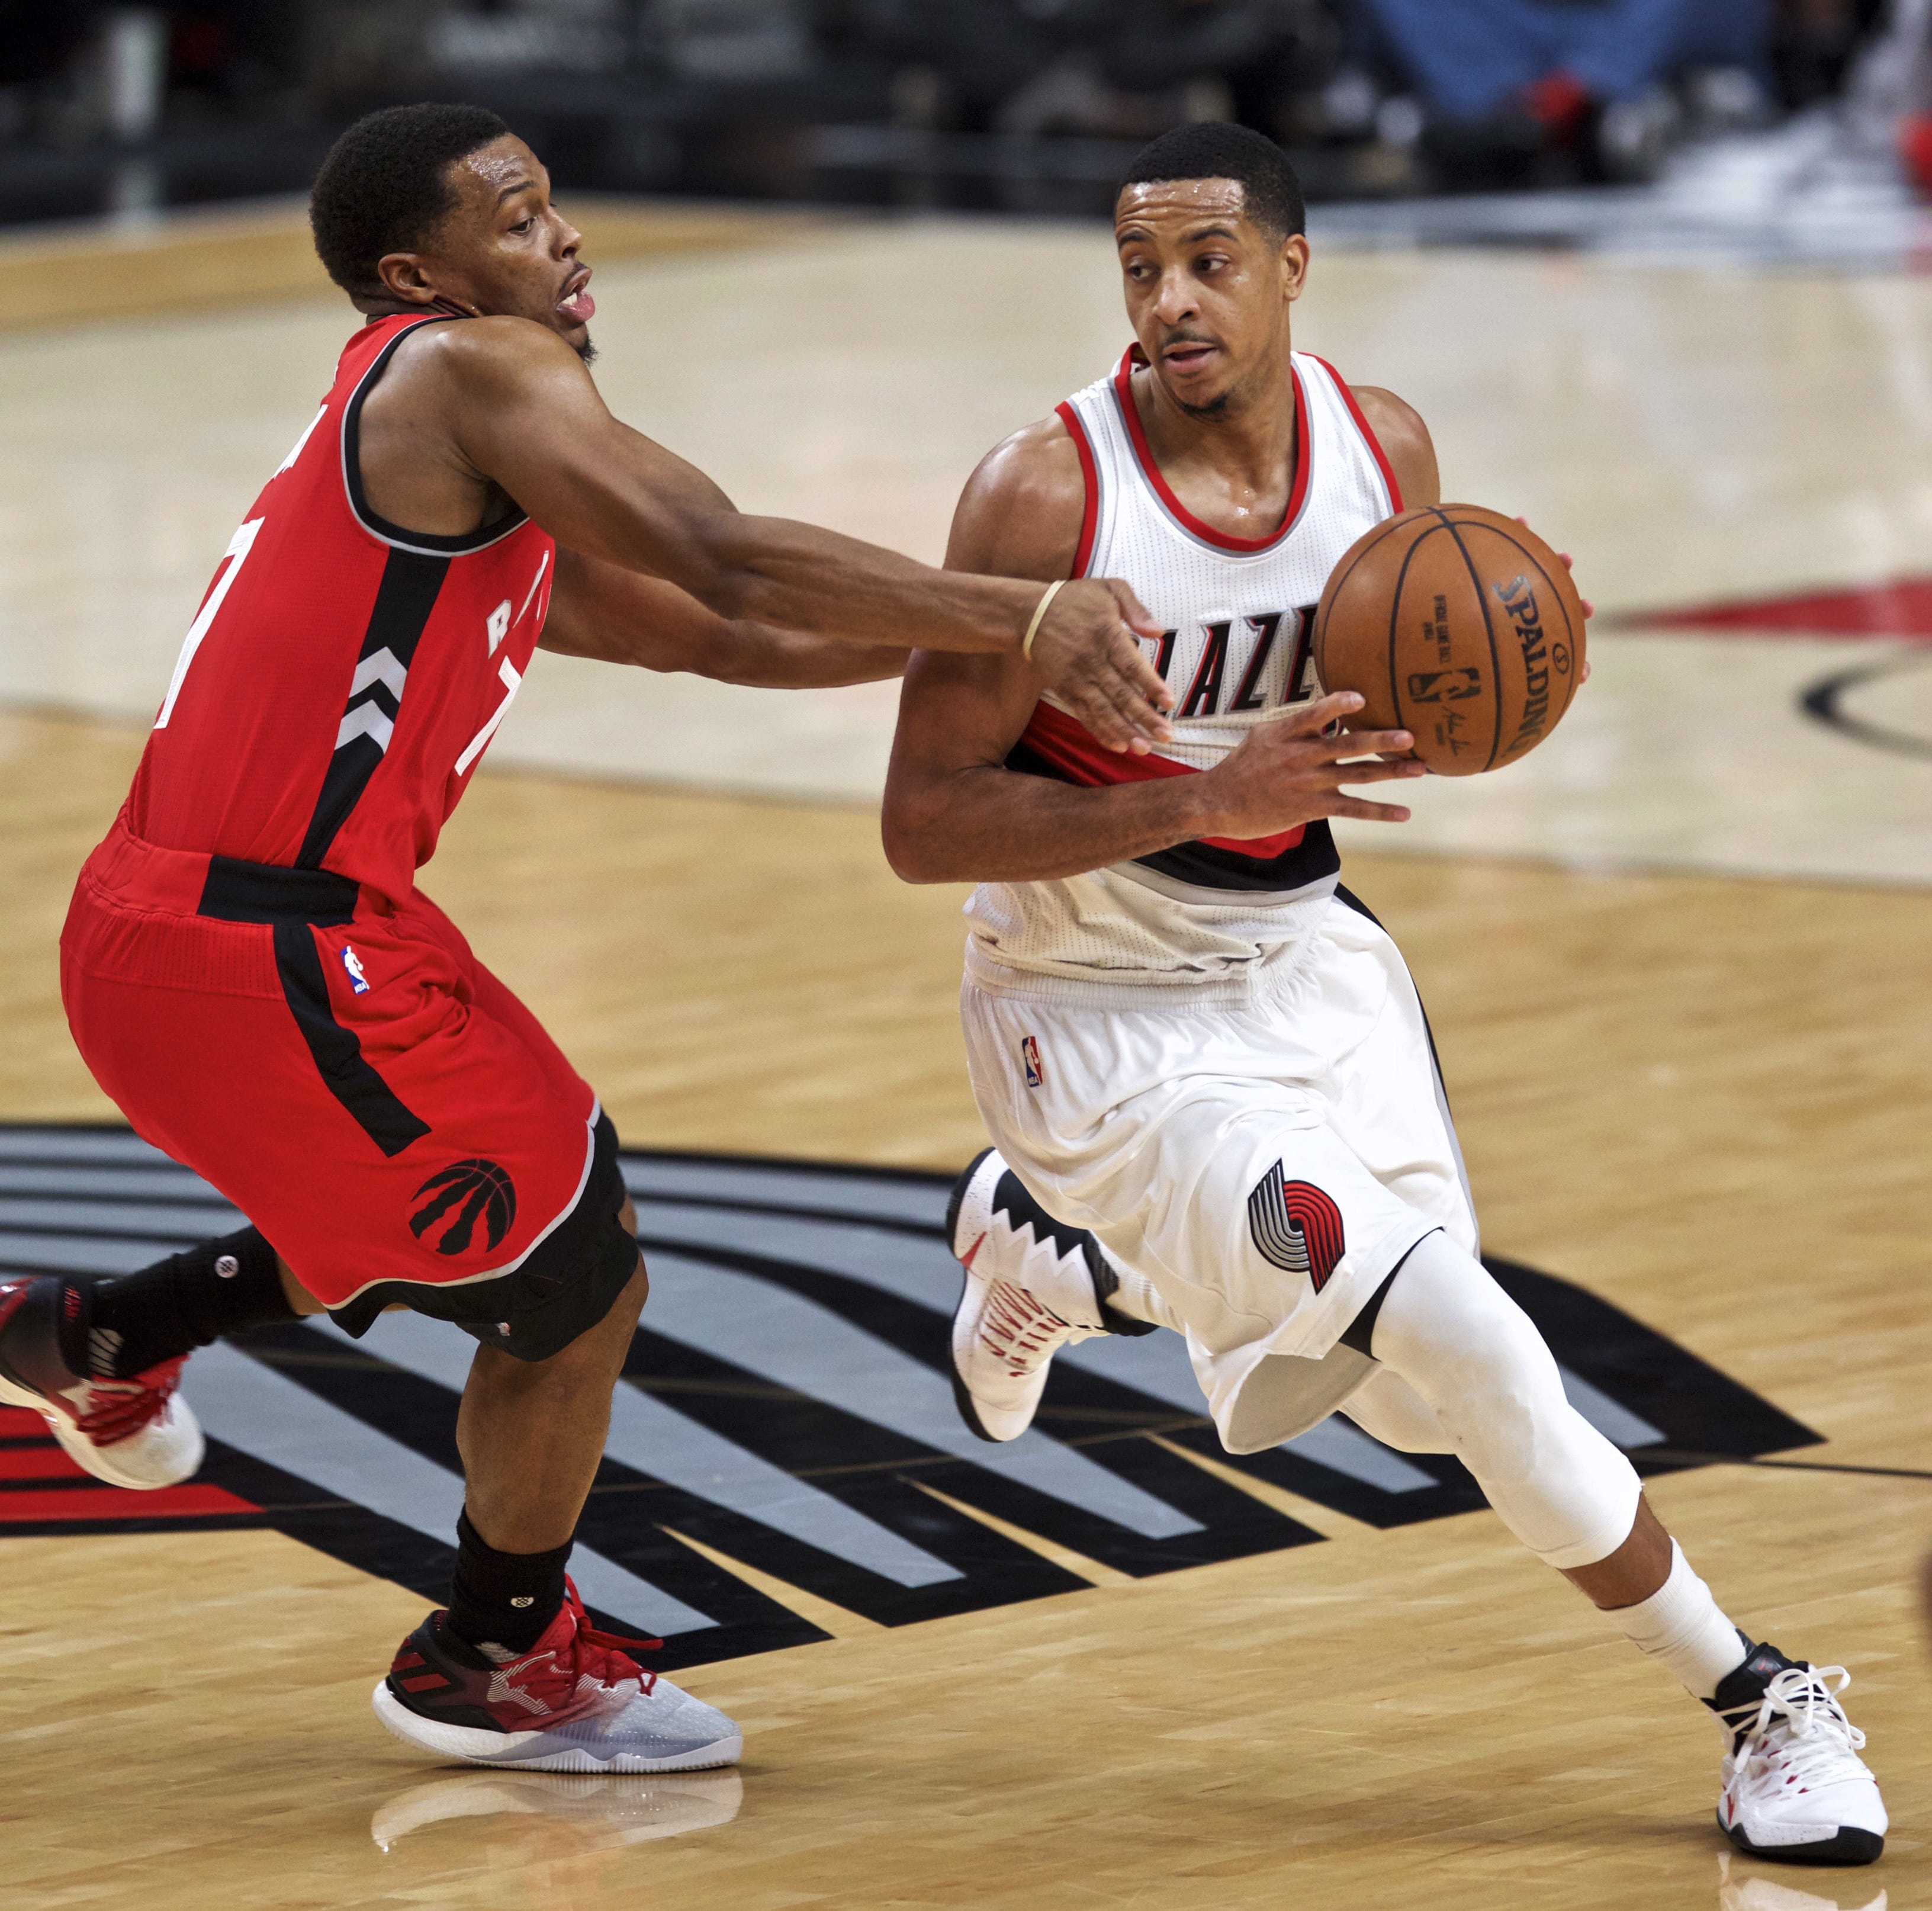 Portland Trail Blazers guard C.J. McCollum, right, dribbles around Toronto Raptors guard Kyle Lowry during the second half of an NBA basketball game in Portland, Ore., Monday, Dec. 26, 2016.